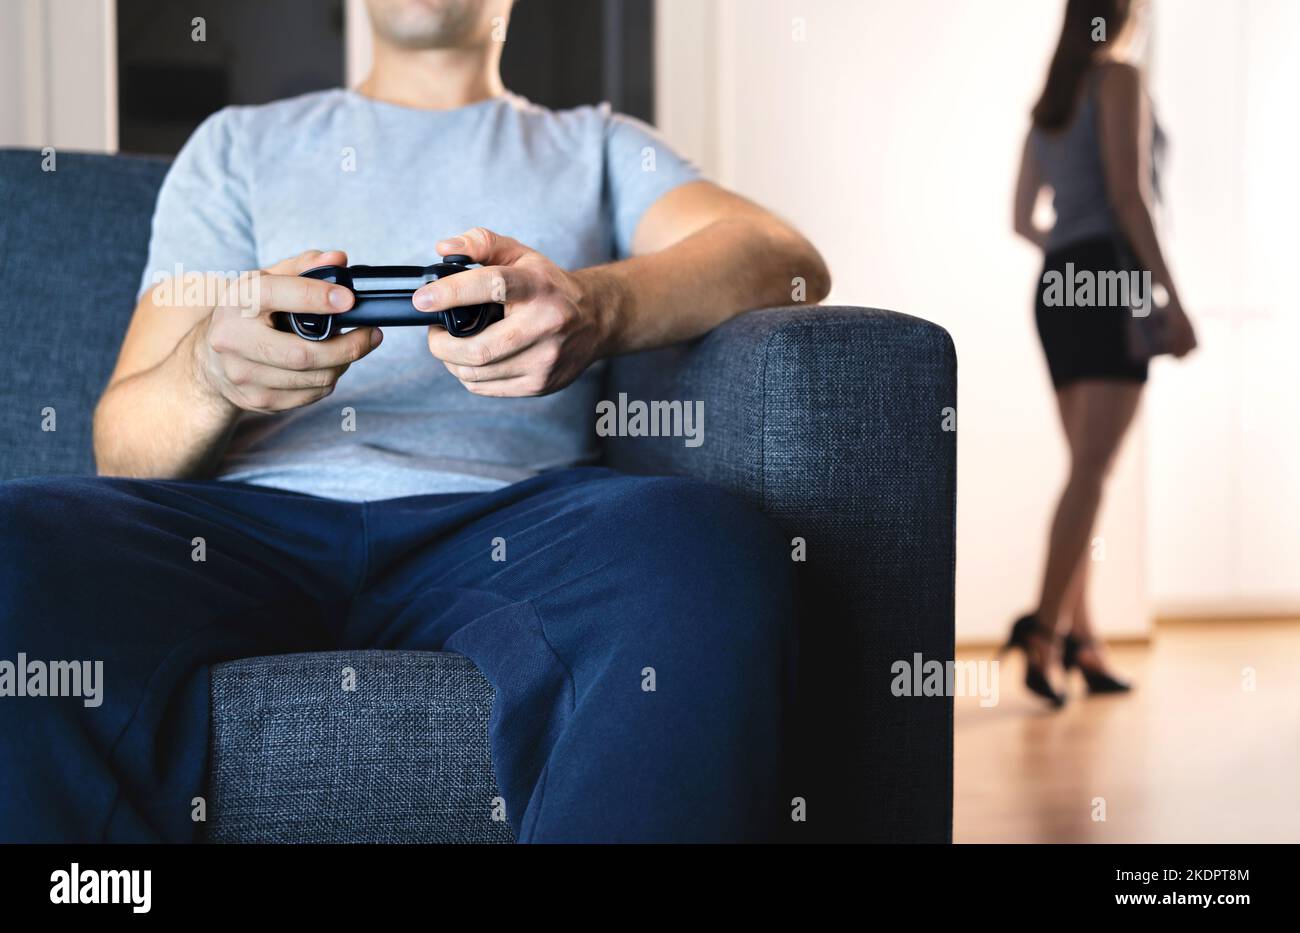 Couple in distant marriage. Man playing video game ignoring woman. Lack of connection. Relationship fight and crisis. Lazy husband on couch. Stock Photo